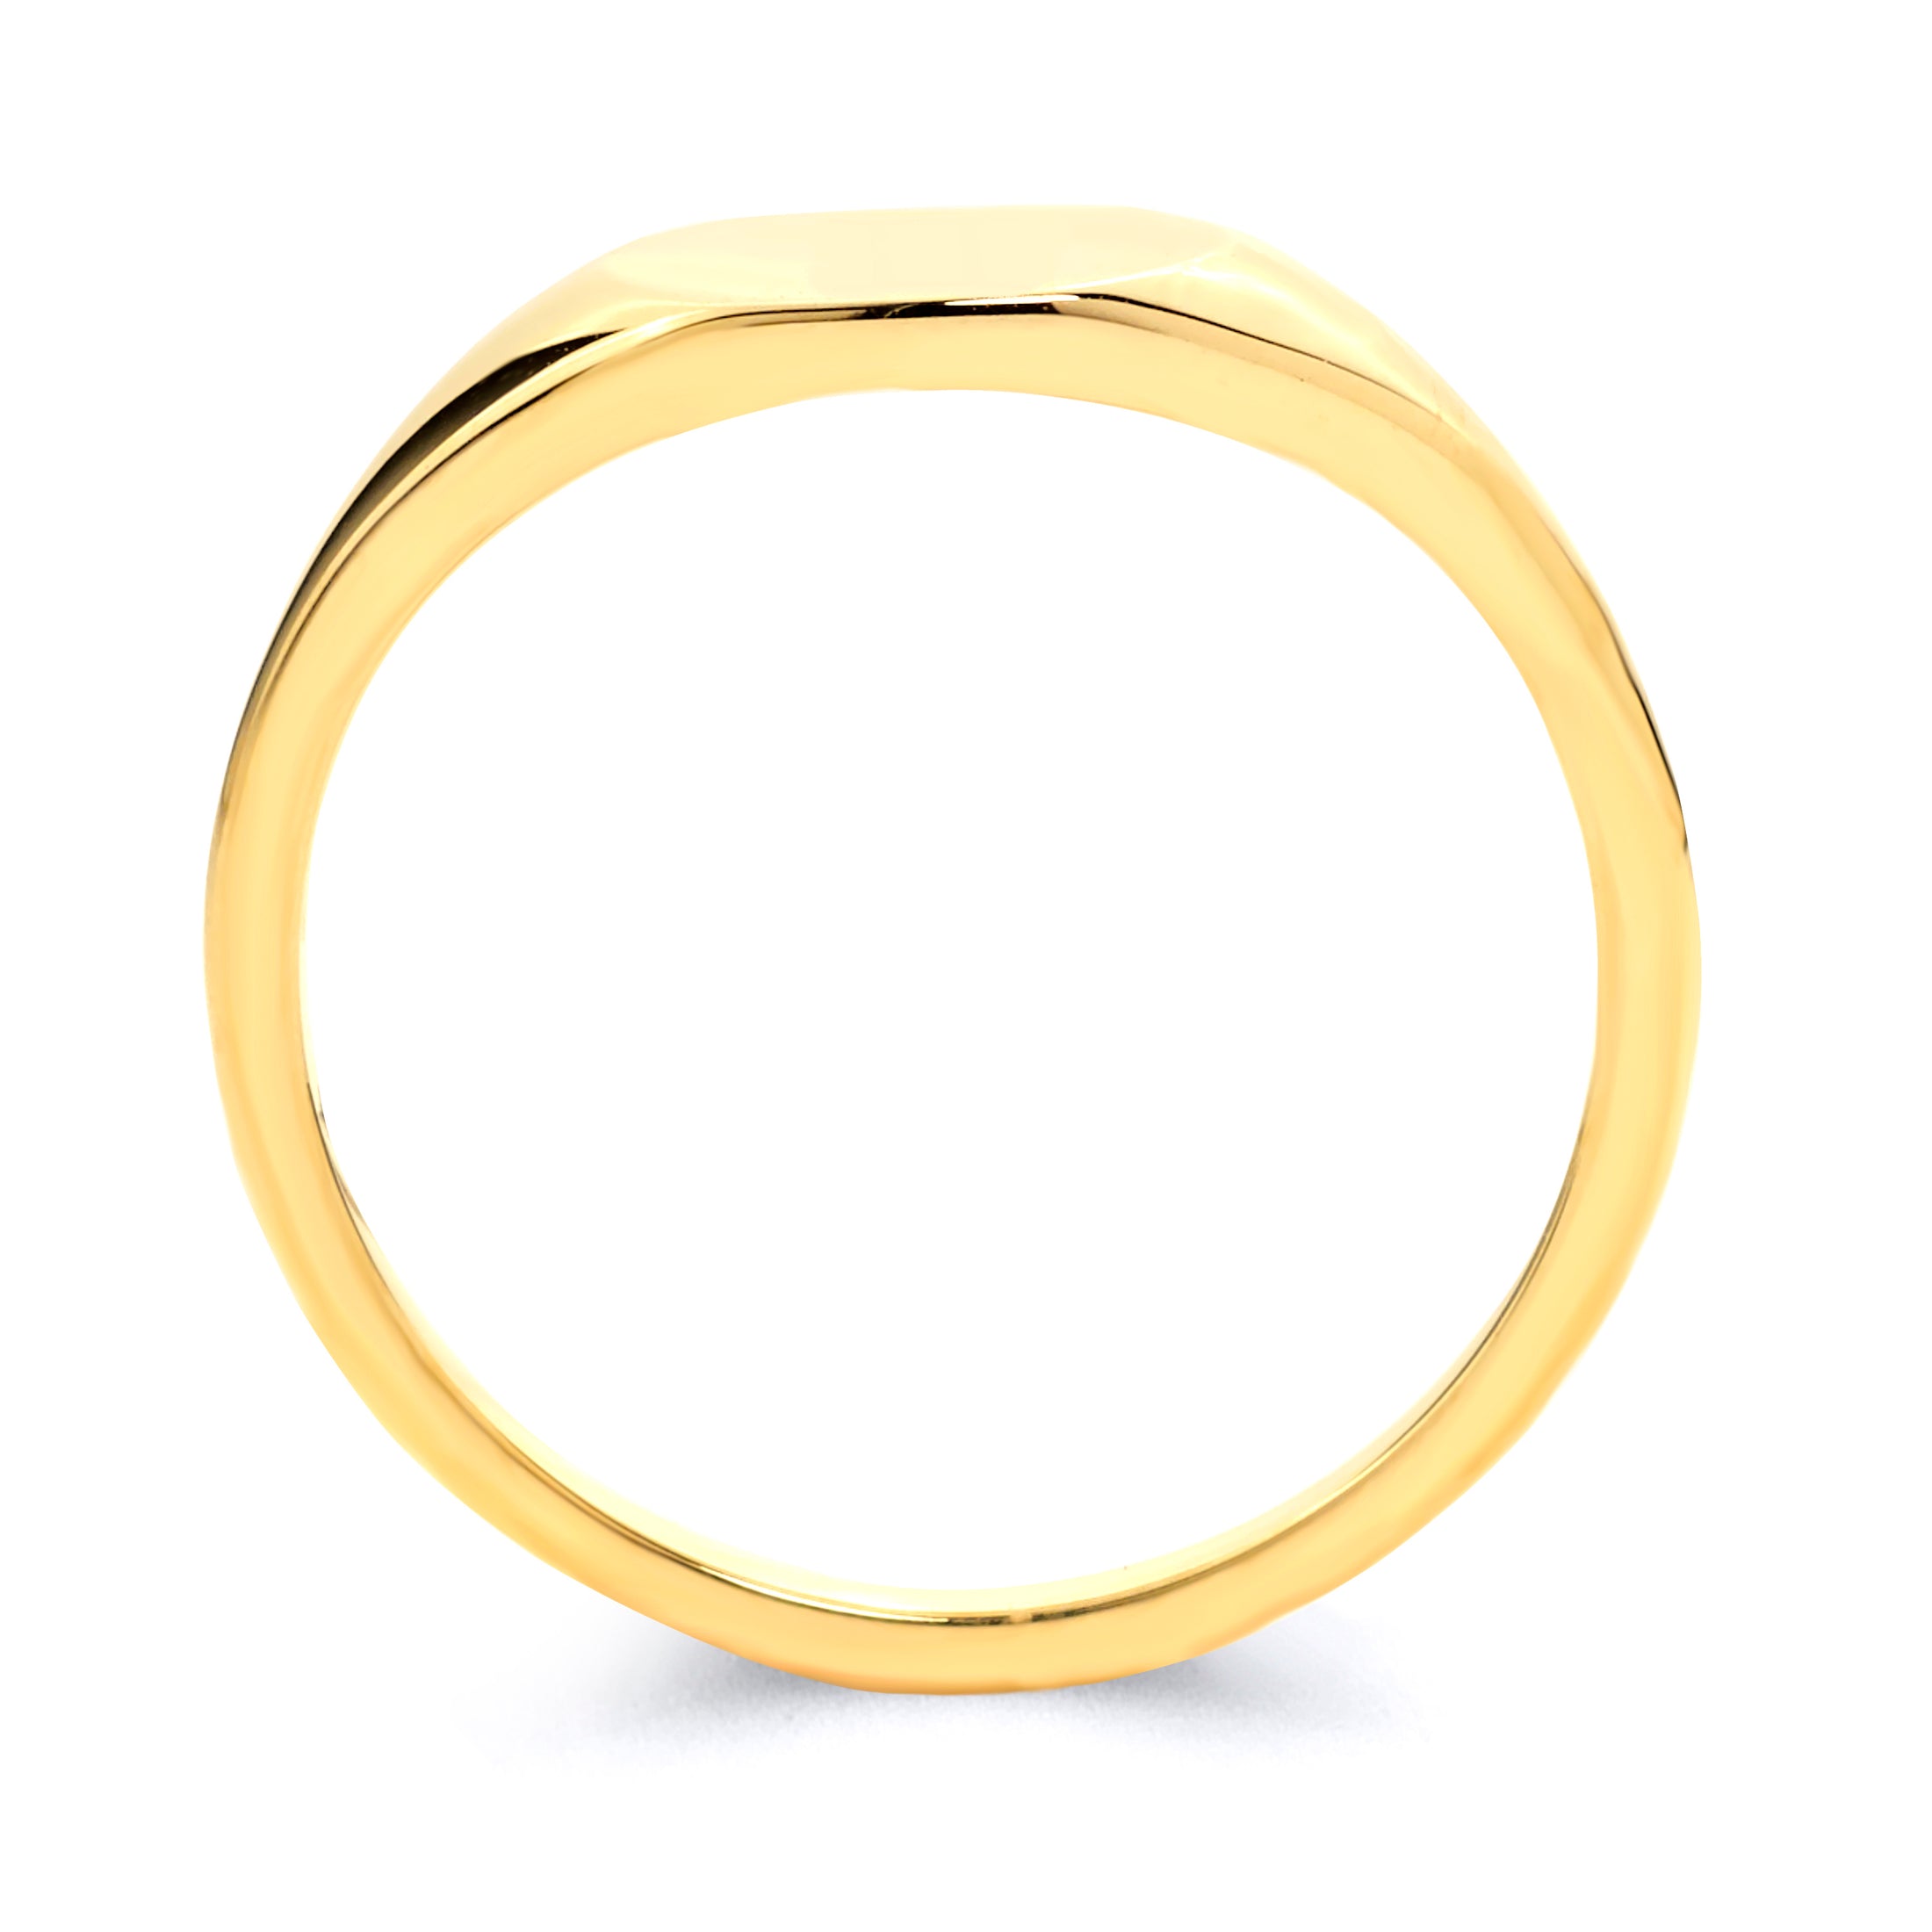 Solid Gold Personalized Name Ring - 10k or 14k